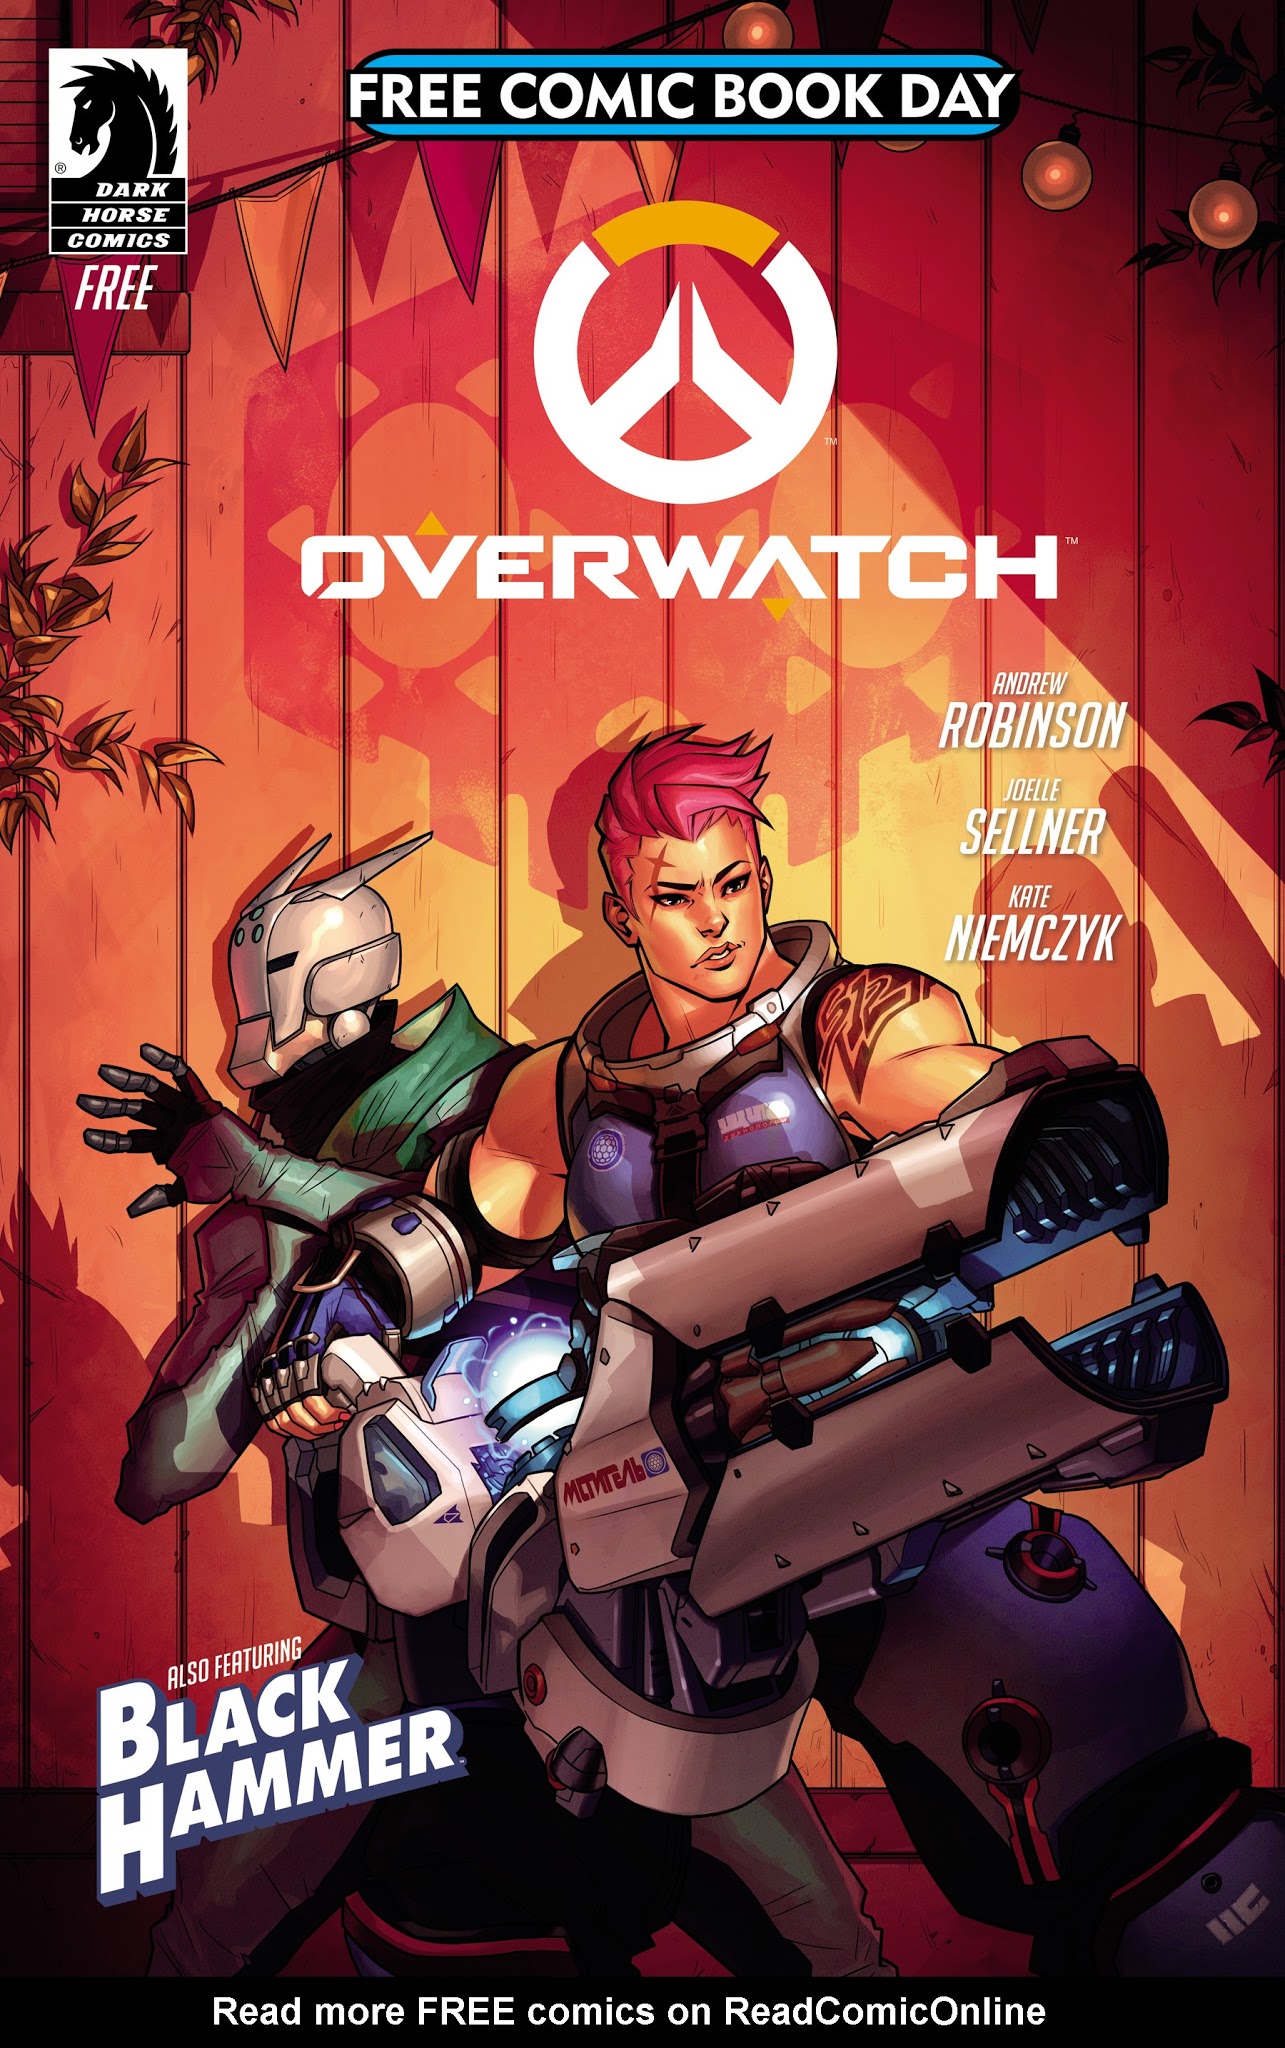 Read online Free Comic Book Day 2018 comic -  Issue # Overwatch and Black Hamme - 1